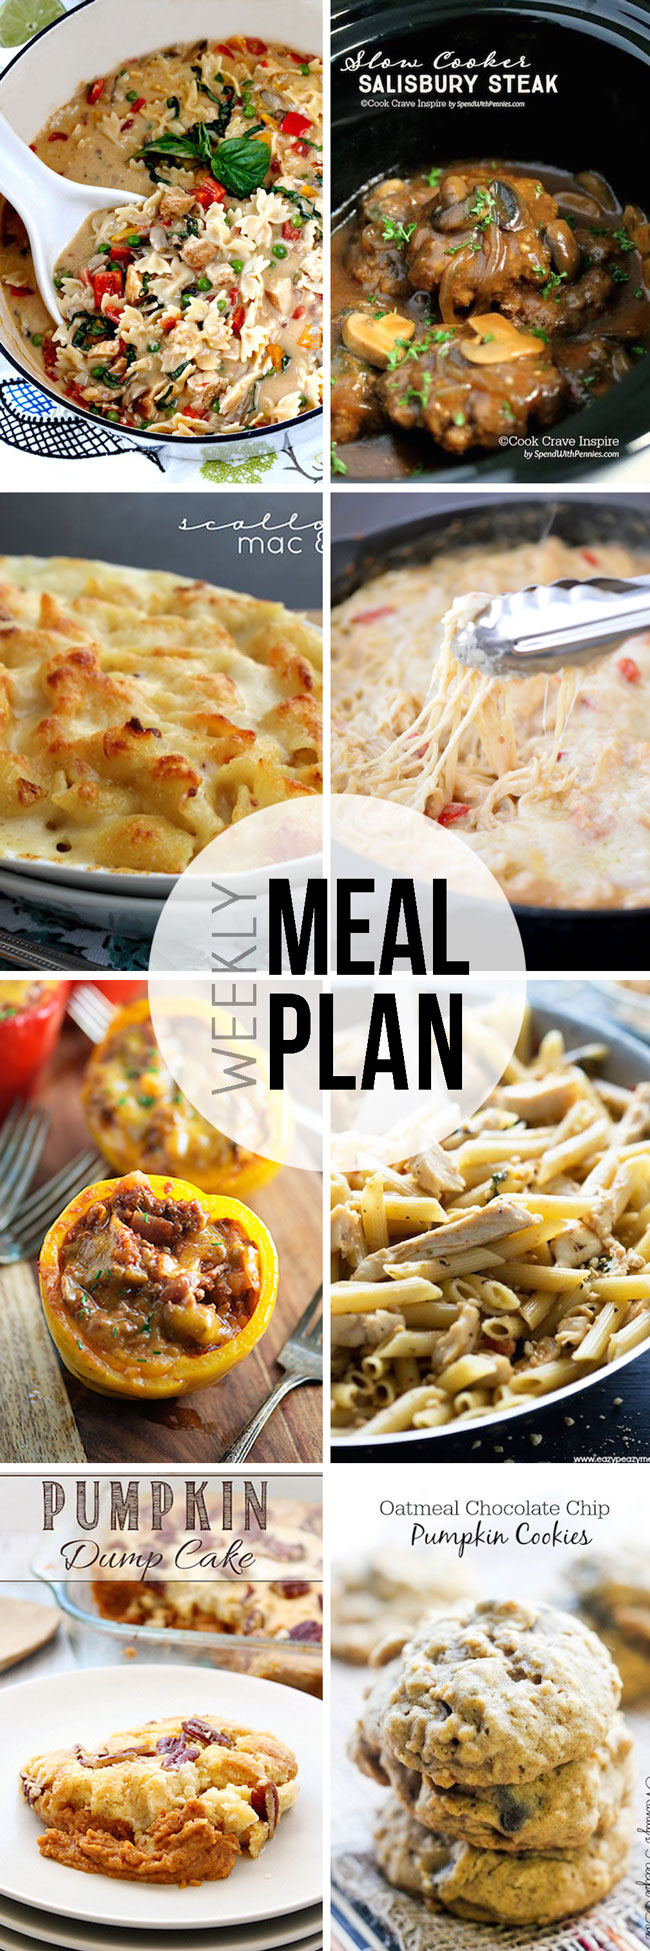 Easy Meal Plan Sunday #15